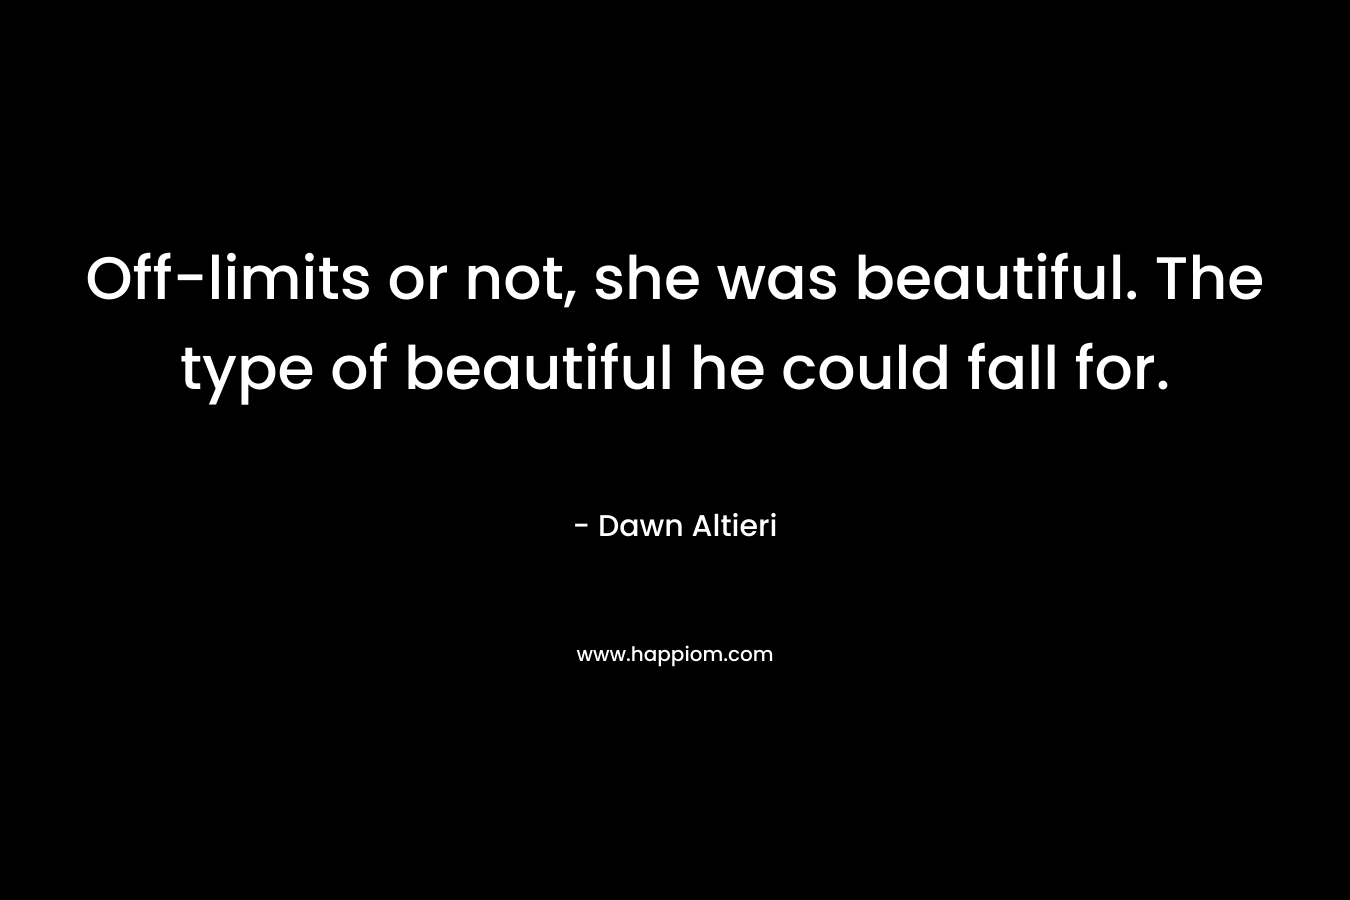 Off-limits or not, she was beautiful. The type of beautiful he could fall for. – Dawn Altieri